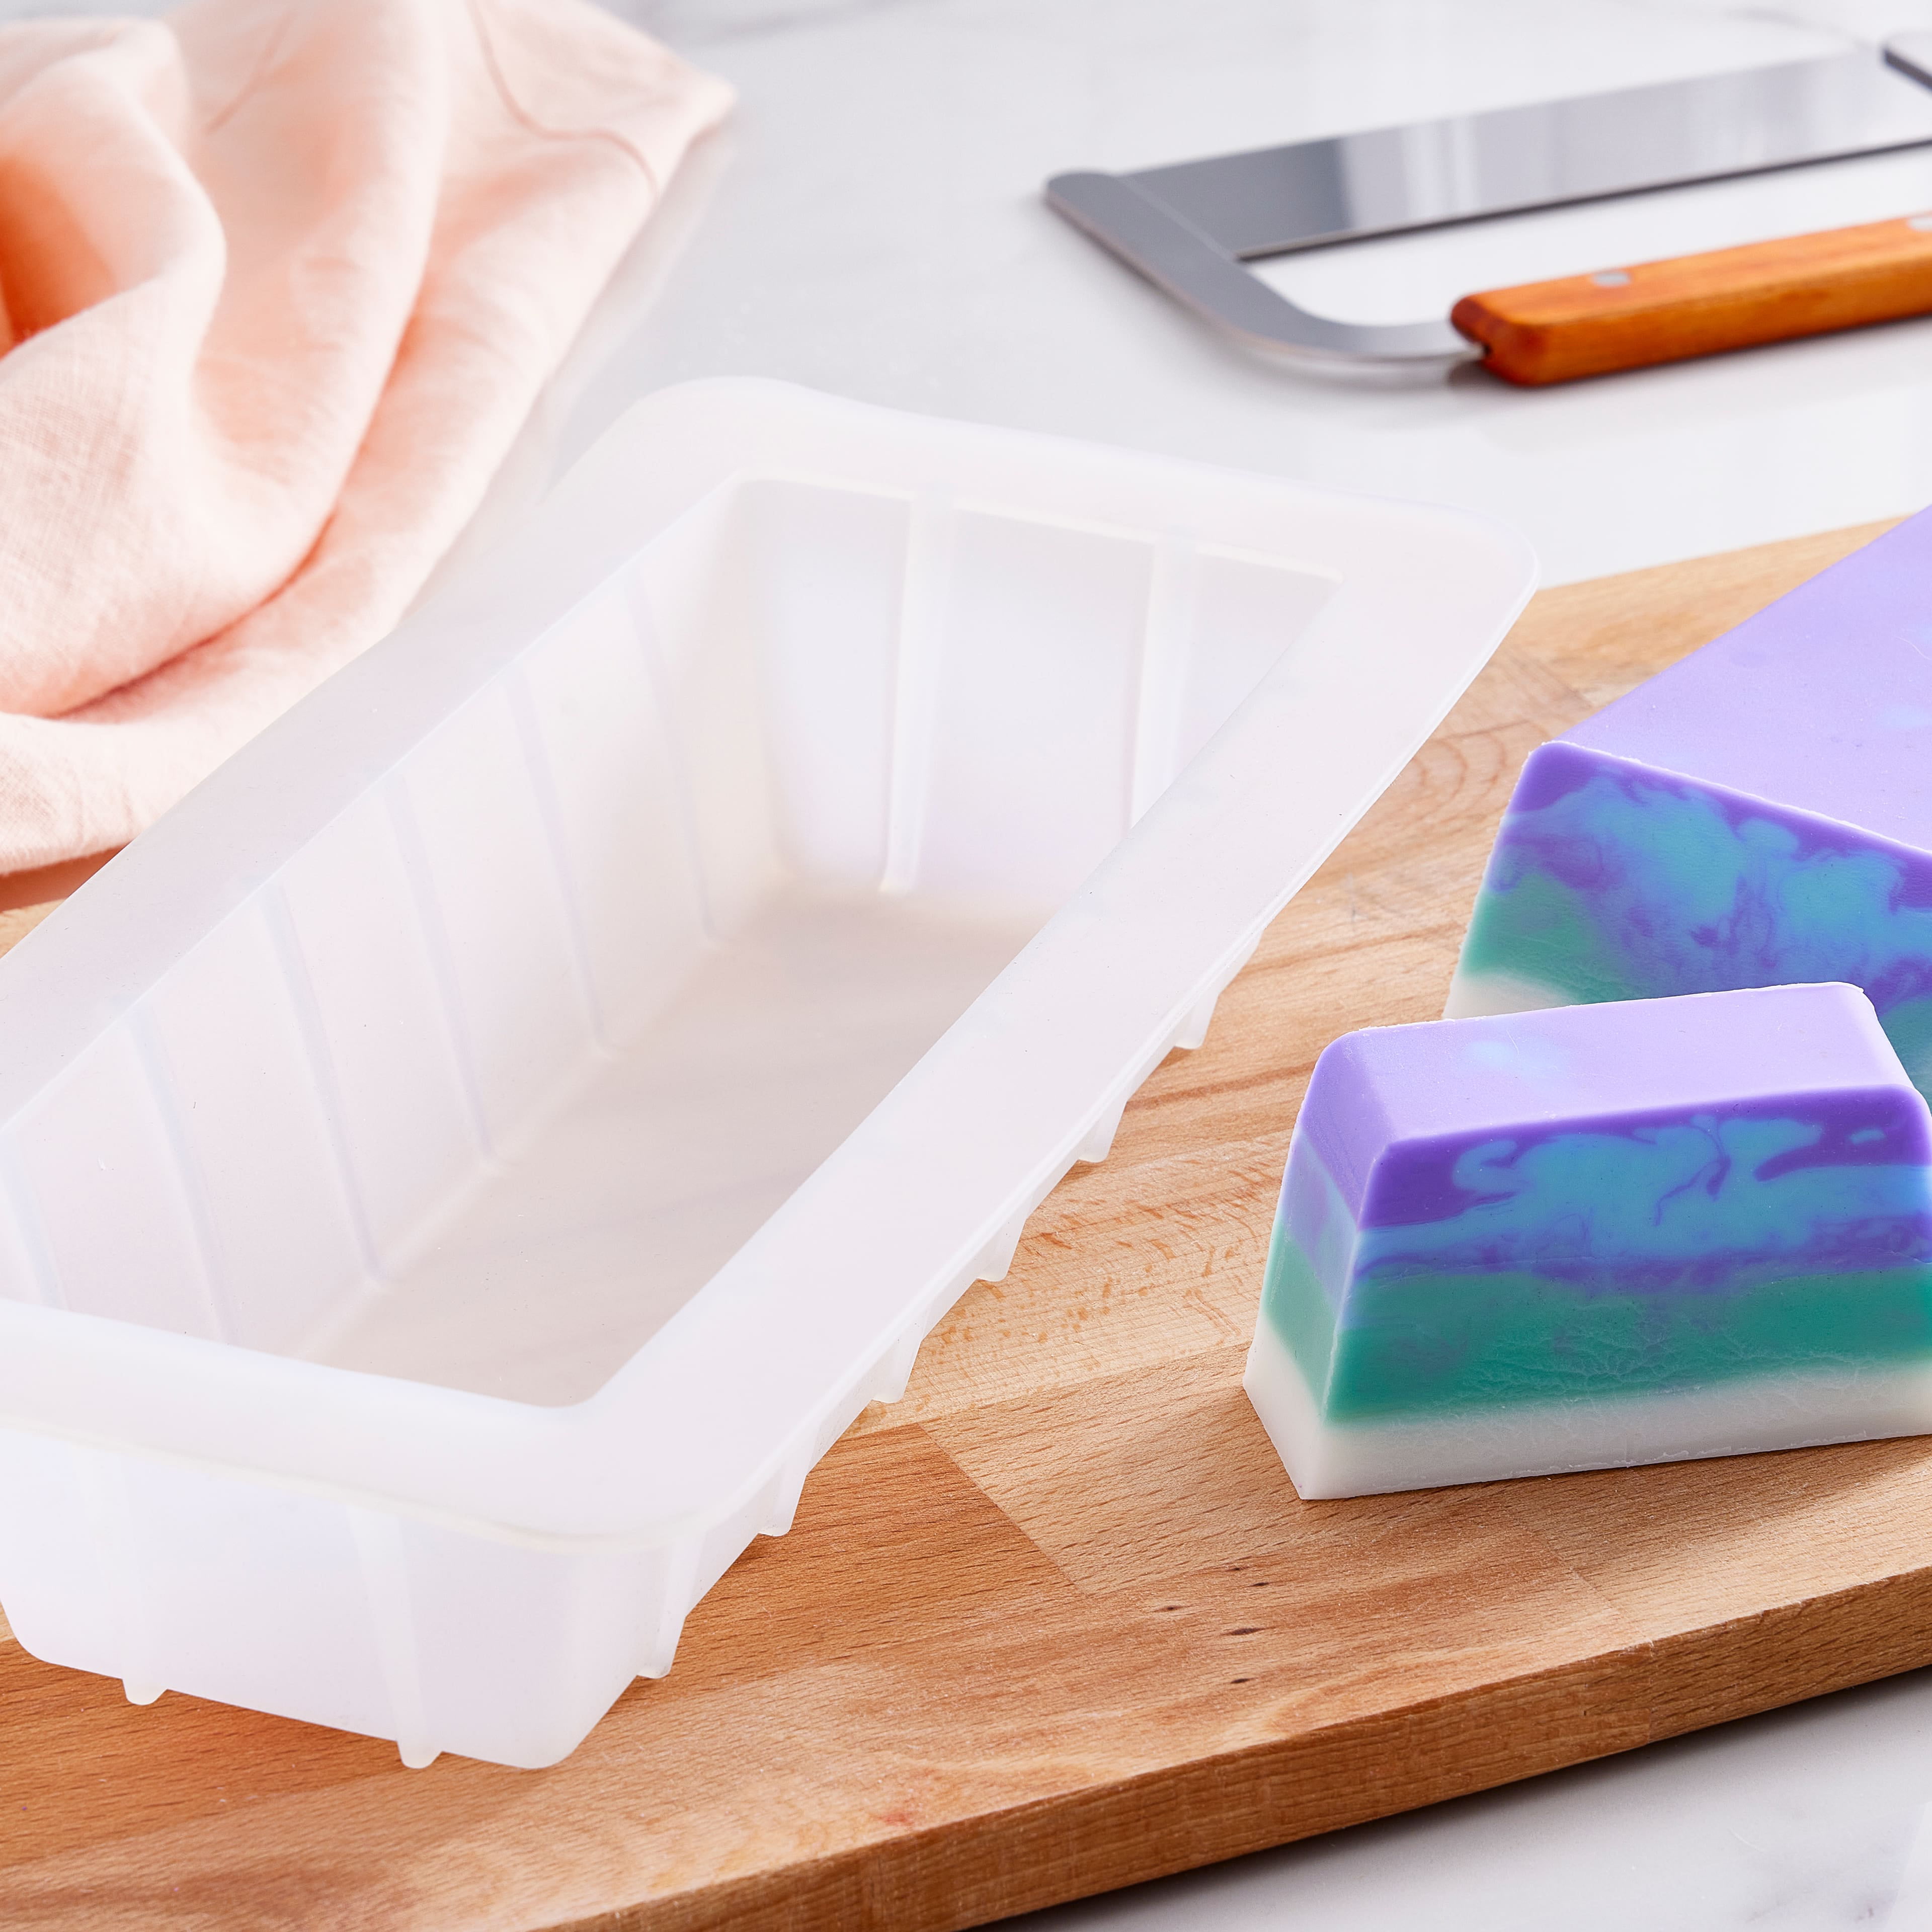 Make silicone soap dish molds with housing kit? - Craftionary